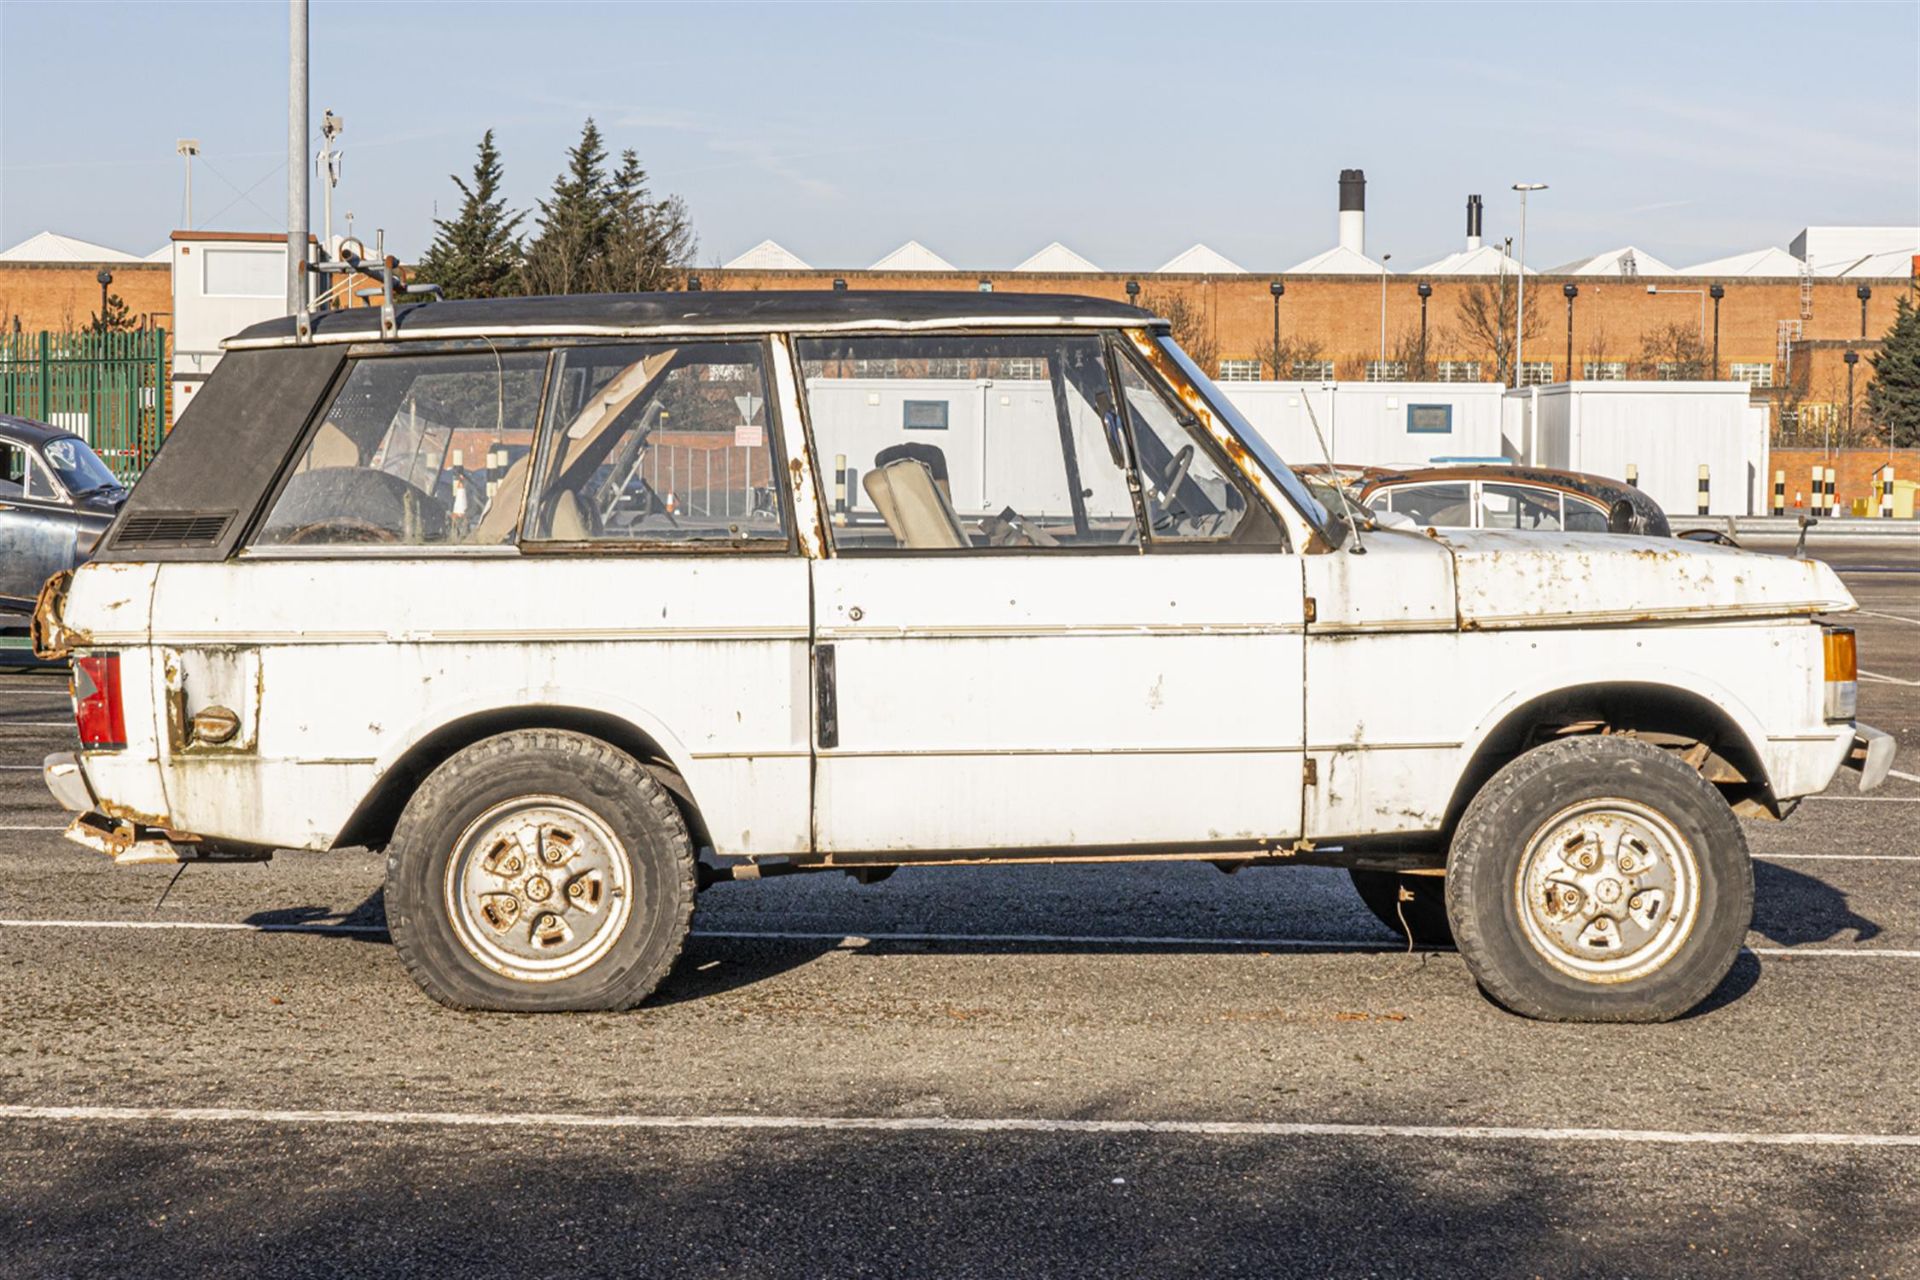 1971 Range Rover Classic 'Suffix A' - Image 2 of 5